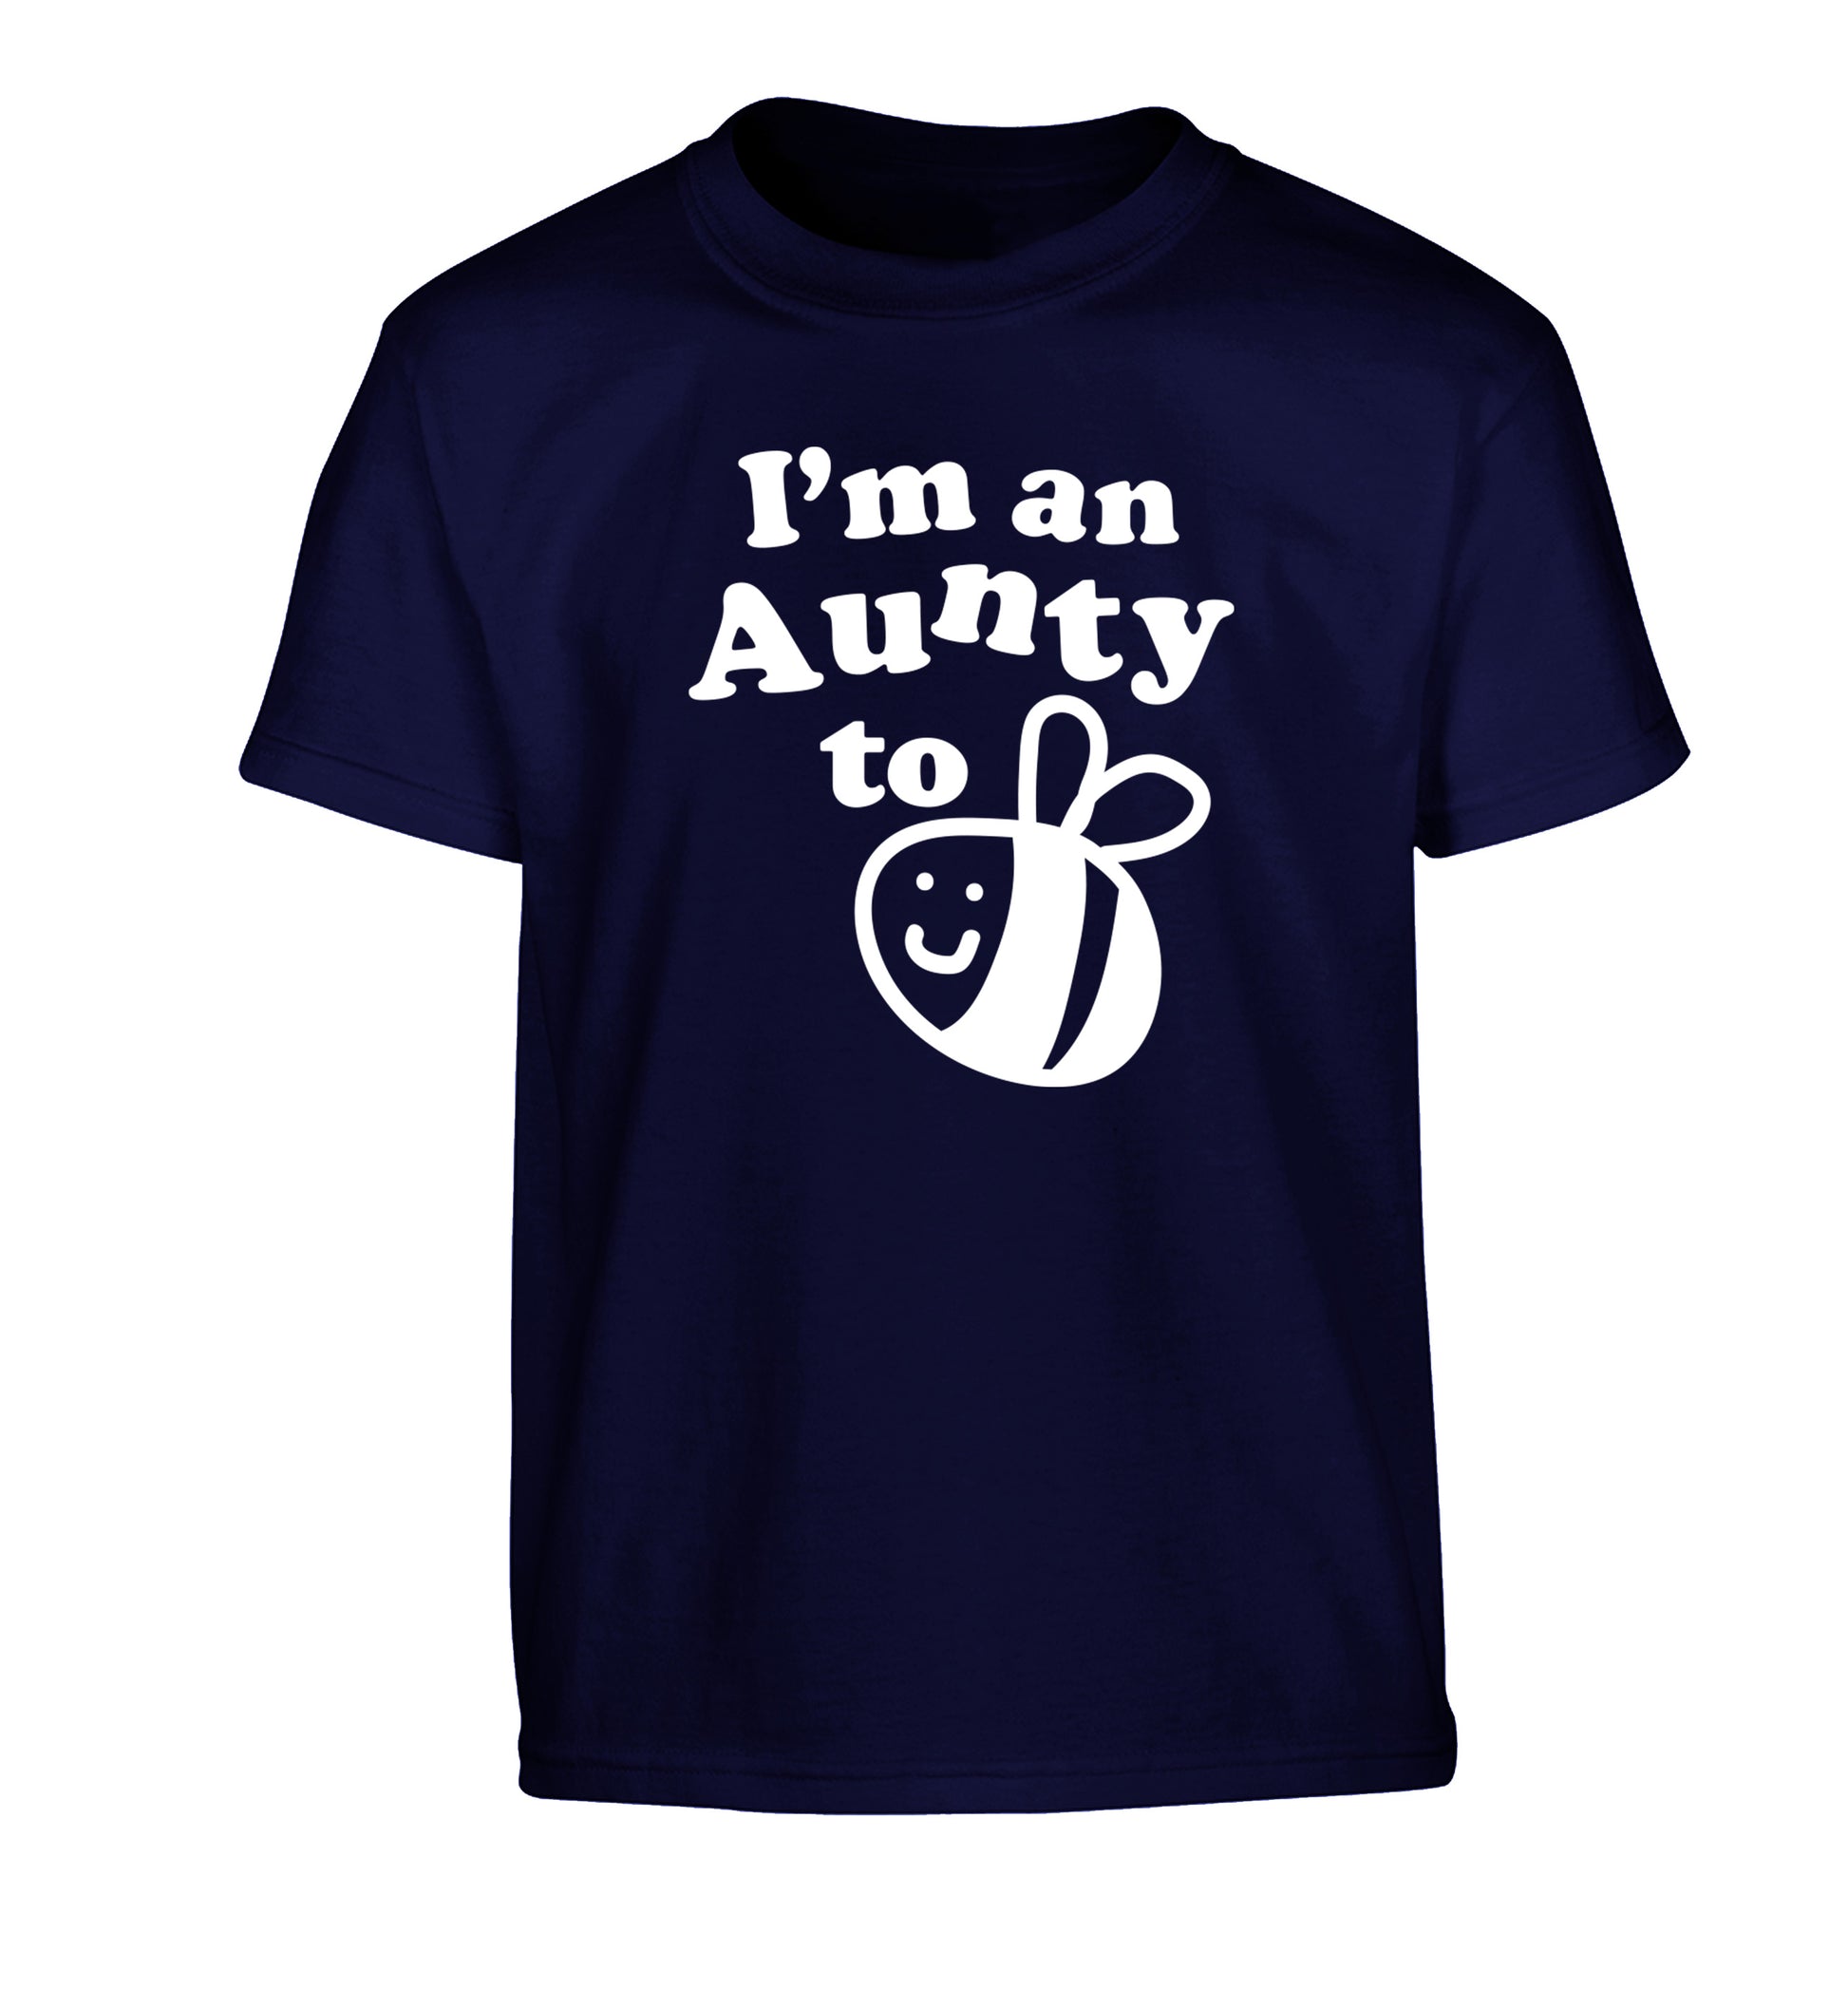 I'm an aunty to be Children's navy Tshirt 12-14 Years